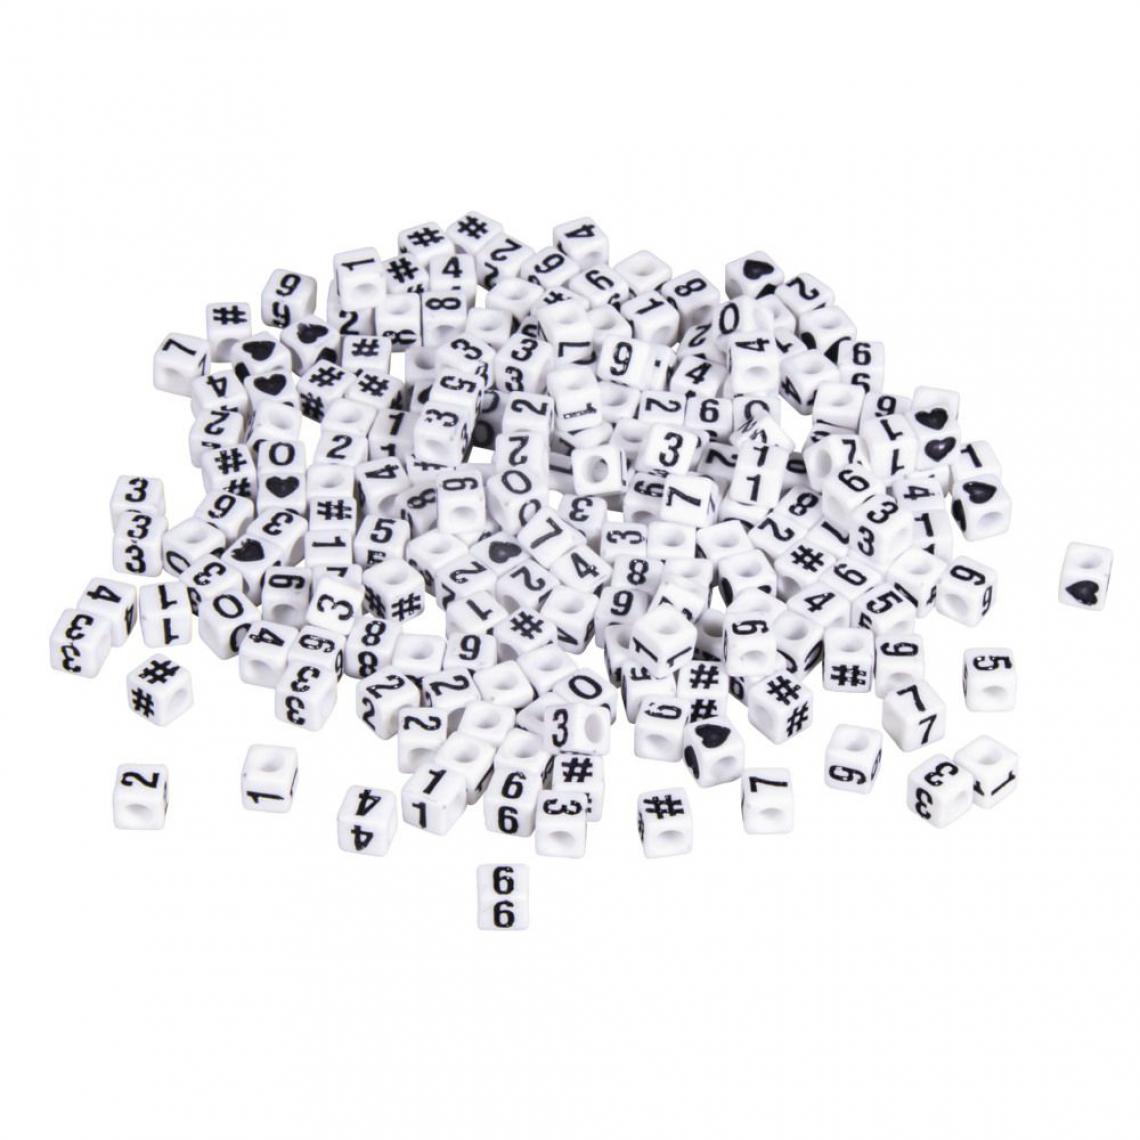 Rayher - Perles Chiffres carrées blanches 5 x 5 mm - Perles